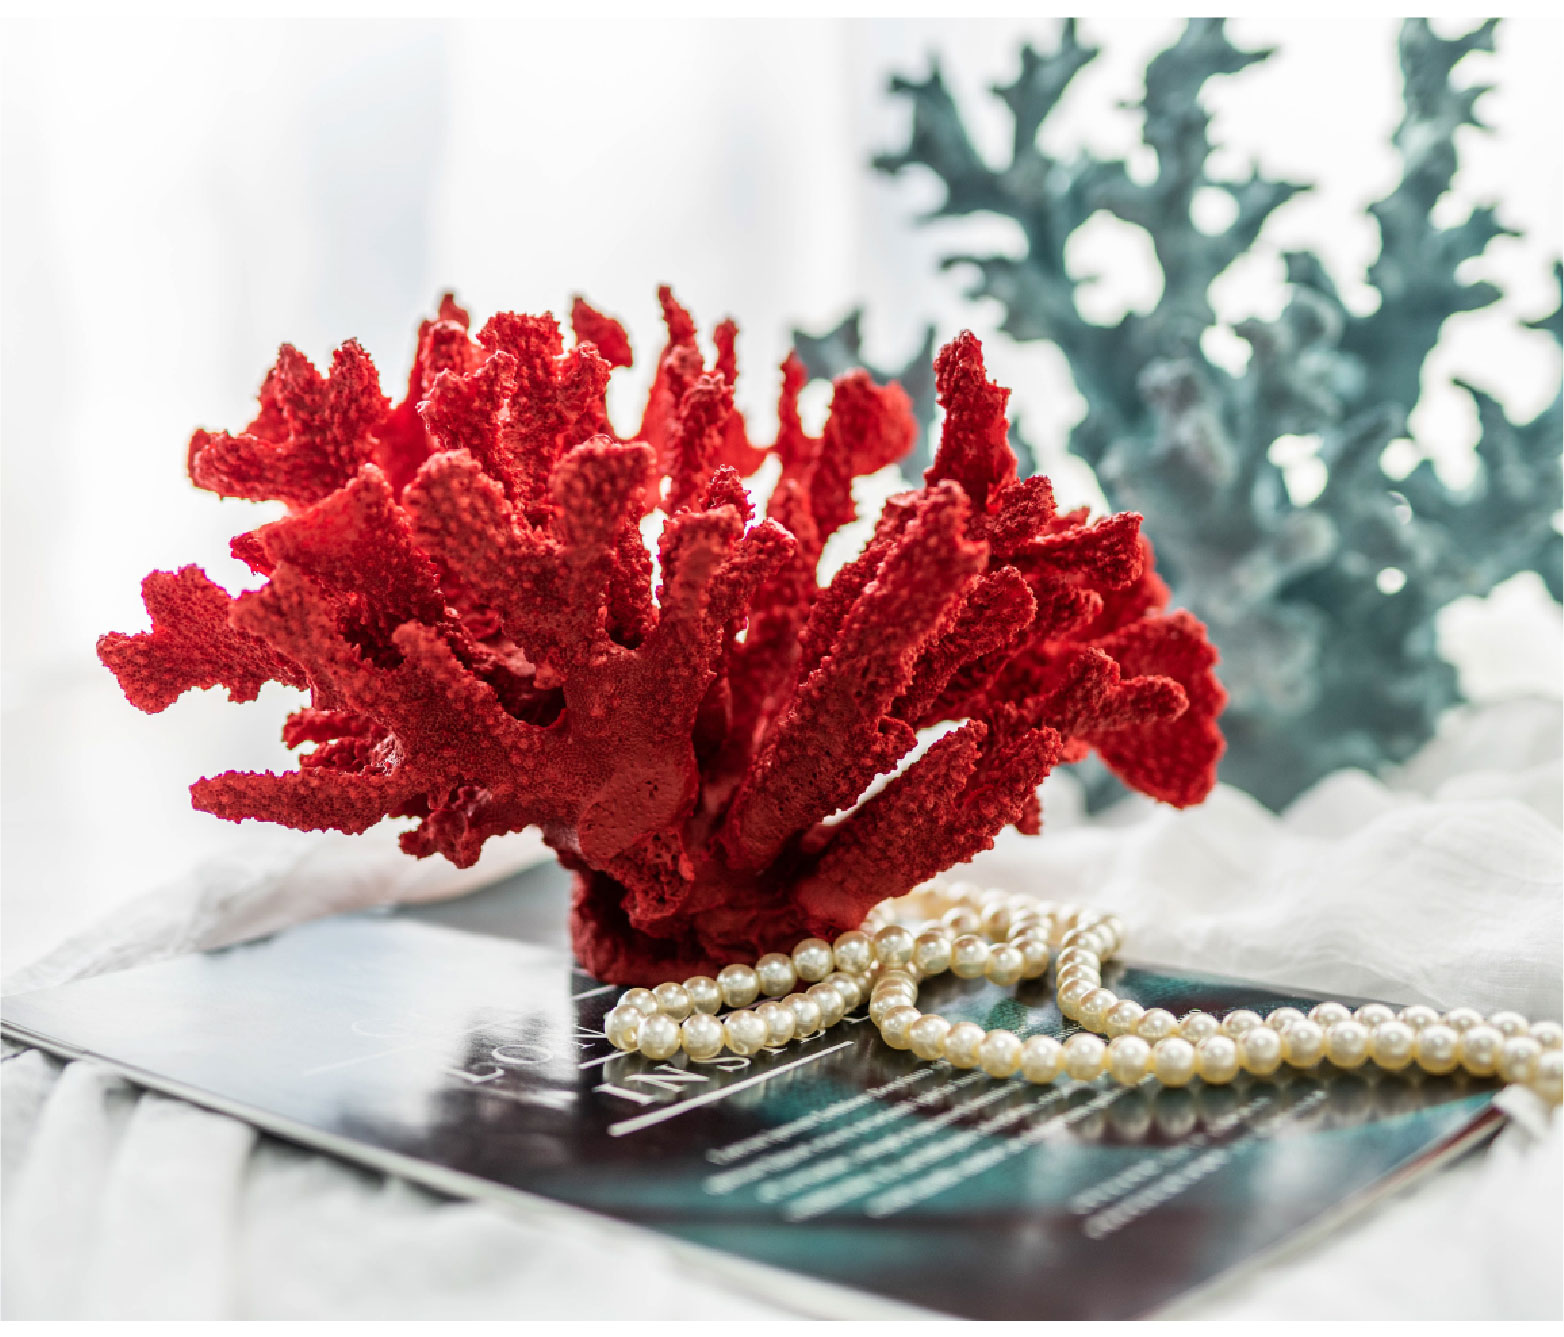 Mediterranean White Red Coral Sculpture Figurine Ornaments Plant Office Home Decoracion Accessories moderno Art Resin Craft Gift